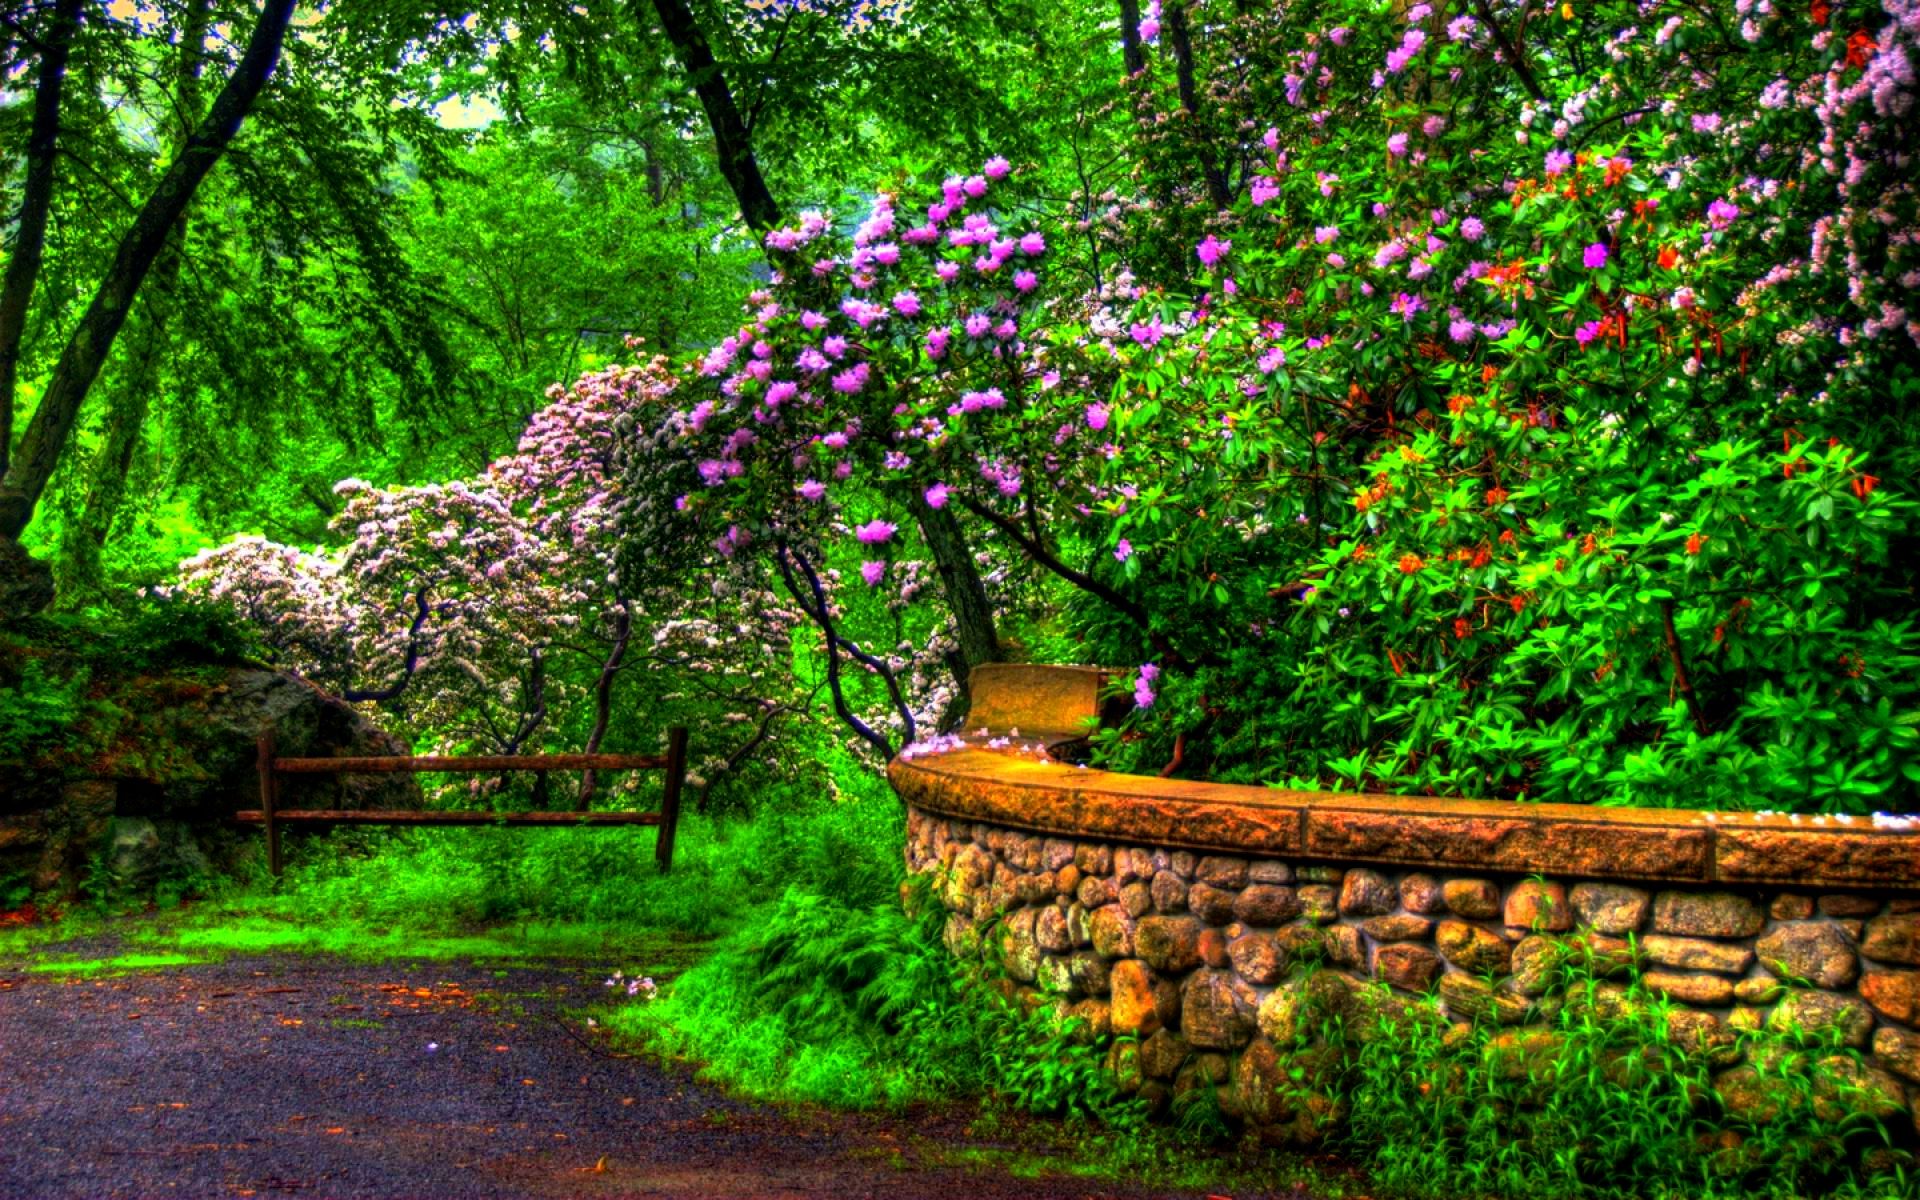 Spring view wallpaper Resolution 1920x1200 | Best Download this awesome wallpaper - Cool Wallpaper HD - CoolWallpaper-HD.com